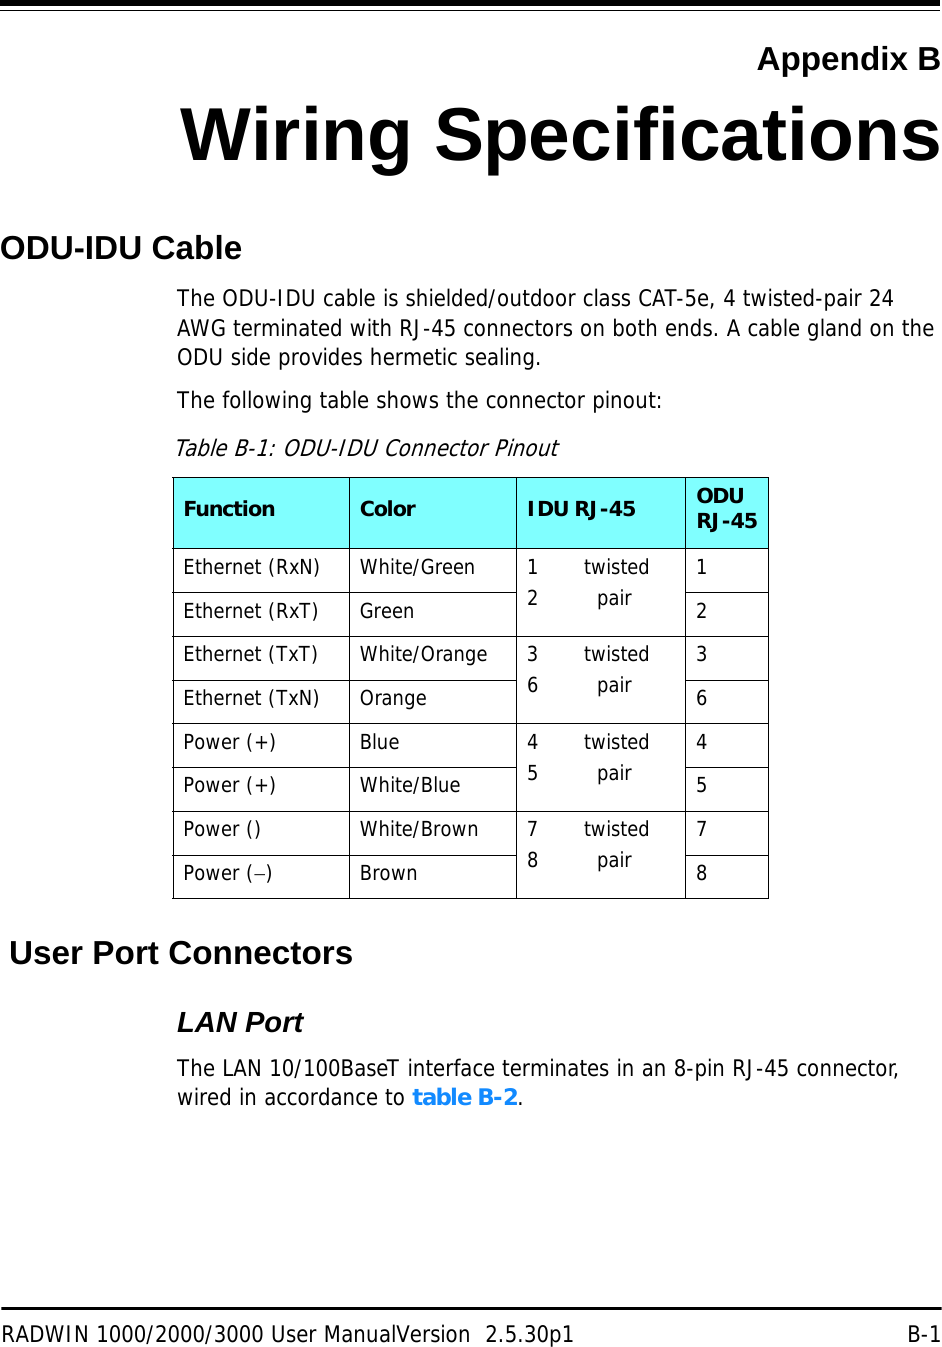 RADWIN 1000/2000/3000 User ManualVersion  2.5.30p1 B-1Appendix BWiring SpecificationsODU-IDU CableThe ODU-IDU cable is shielded/outdoor class CAT-5e, 4 twisted-pair 24 AWG terminated with RJ-45 connectors on both ends. A cable gland on the ODU side provides hermetic sealing.The following table shows the connector pinout: User Port ConnectorsLAN PortThe LAN 10/100BaseT interface terminates in an 8-pin RJ-45 connector, wired in accordance to table B-2.Table B-1: ODU-IDU Connector PinoutFunction Color IDU RJ-45 ODU RJ-45Ethernet (RxN) White/Green 1       twisted2         pair 1 Ethernet (RxT) Green 2 Ethernet (TxT) White/Orange 3       twisted6         pair 3 Ethernet (TxN) Orange 6 Power (+) Blue 4       twisted5         pair 4 Power (+) White/Blue 5 Power () White/Brown 7       twisted8         pair 7 Power (−)Brown 8 